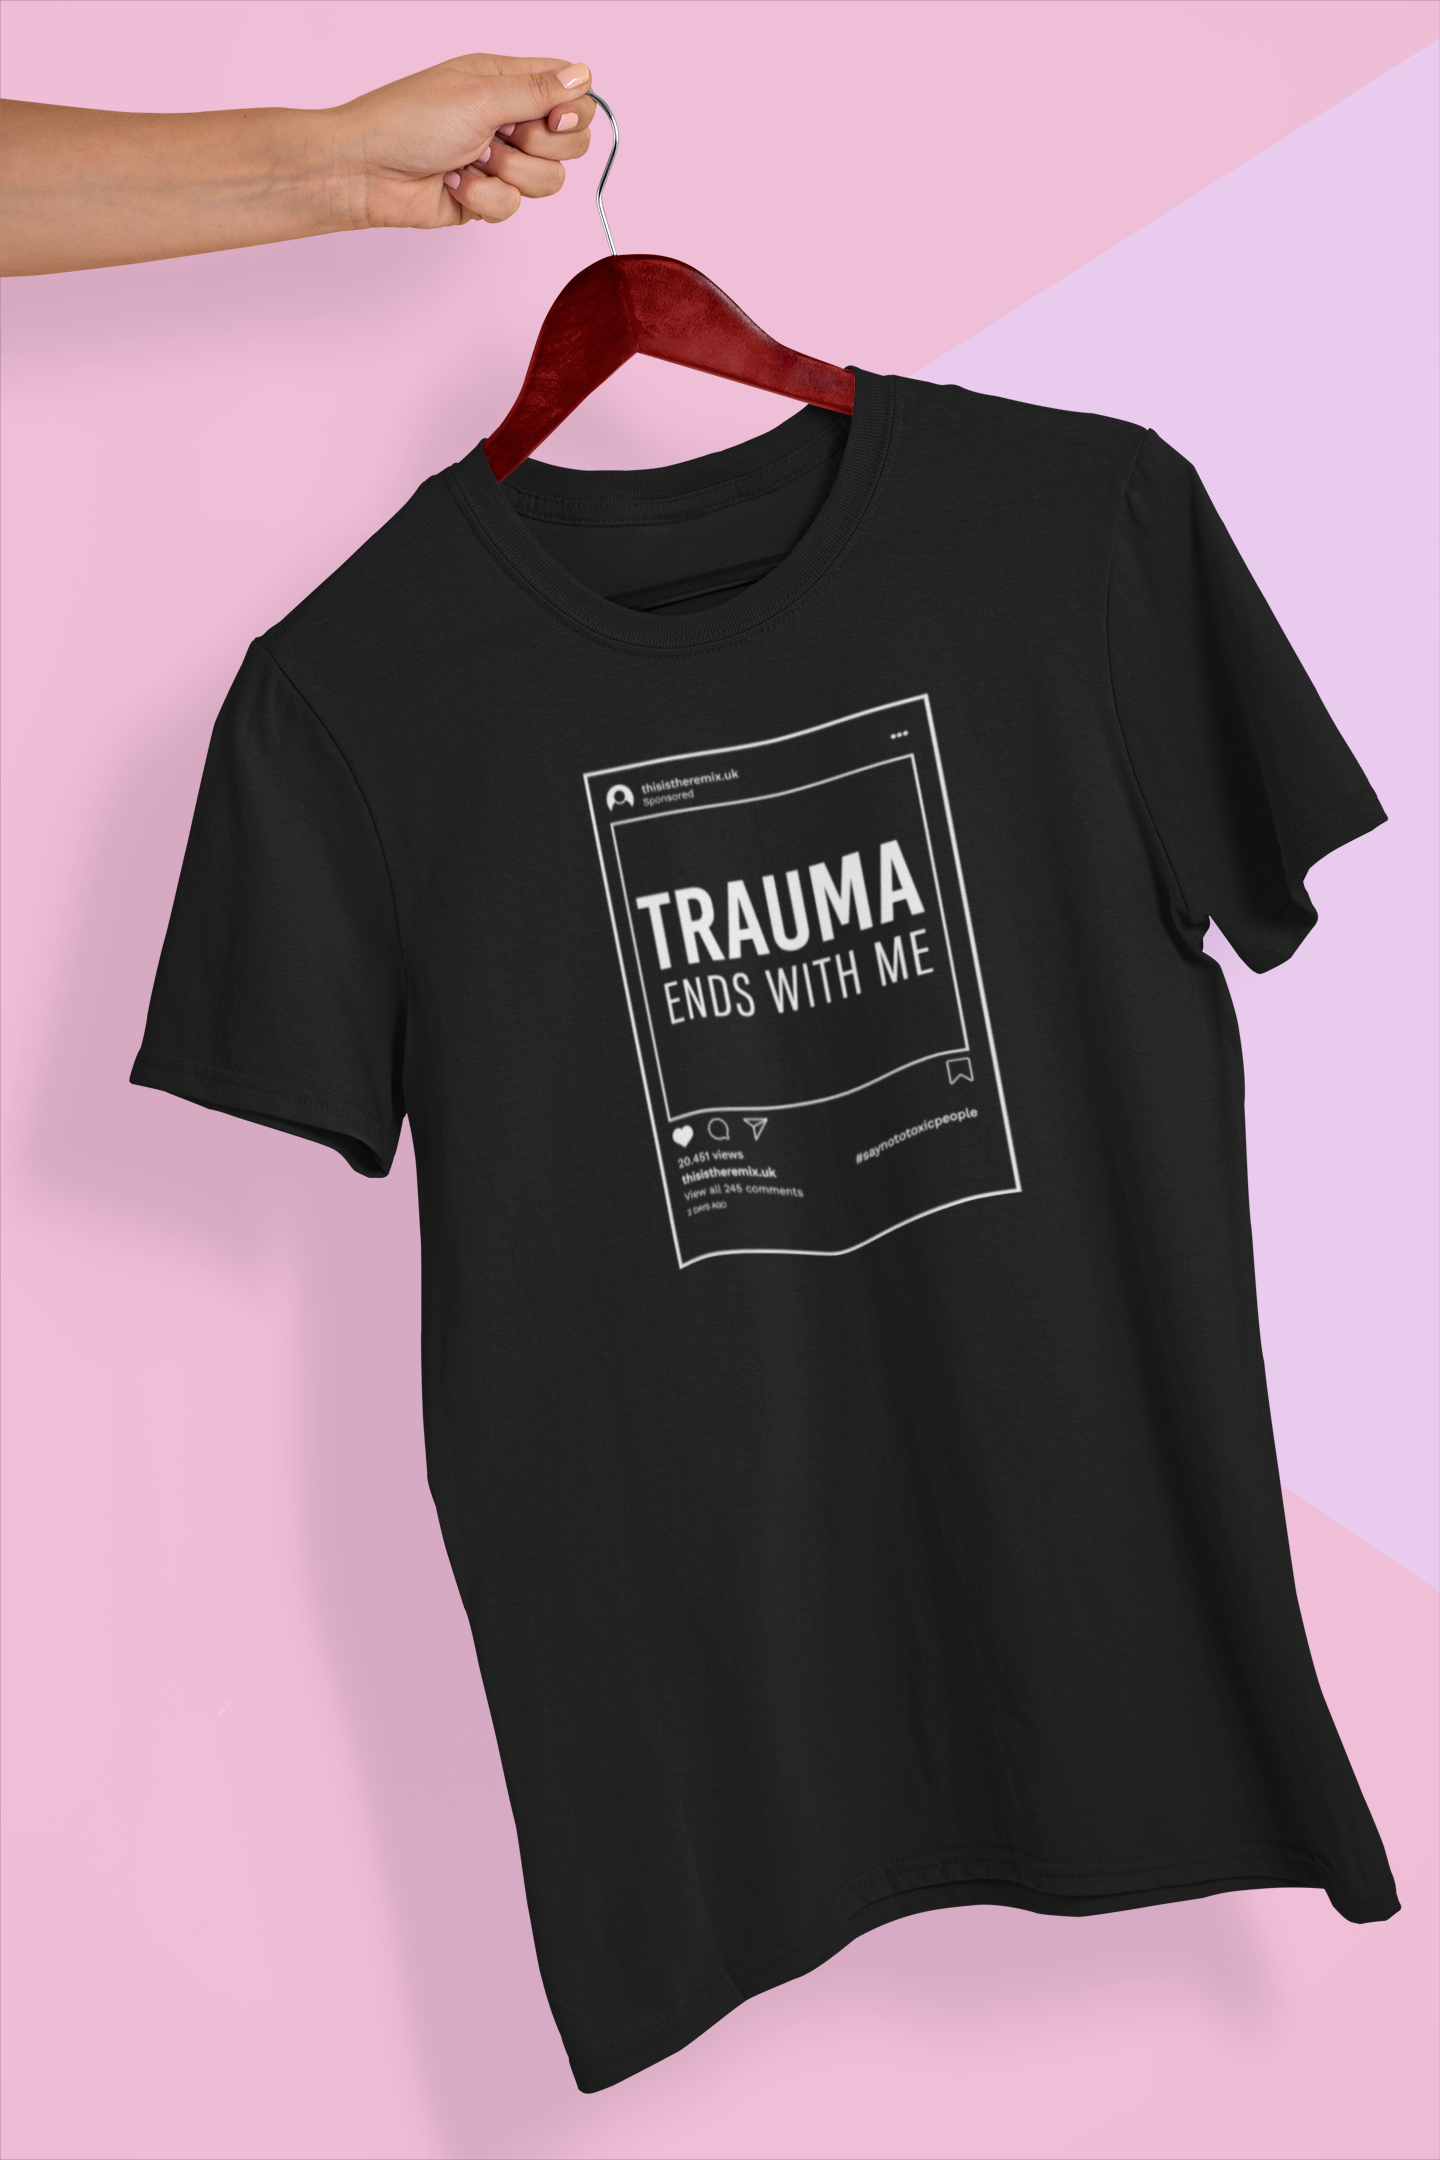 This is The Remix T-shirt UK 10 (S) / Black TRAUMA ENDS WITH ME - Unisex T-Shirt